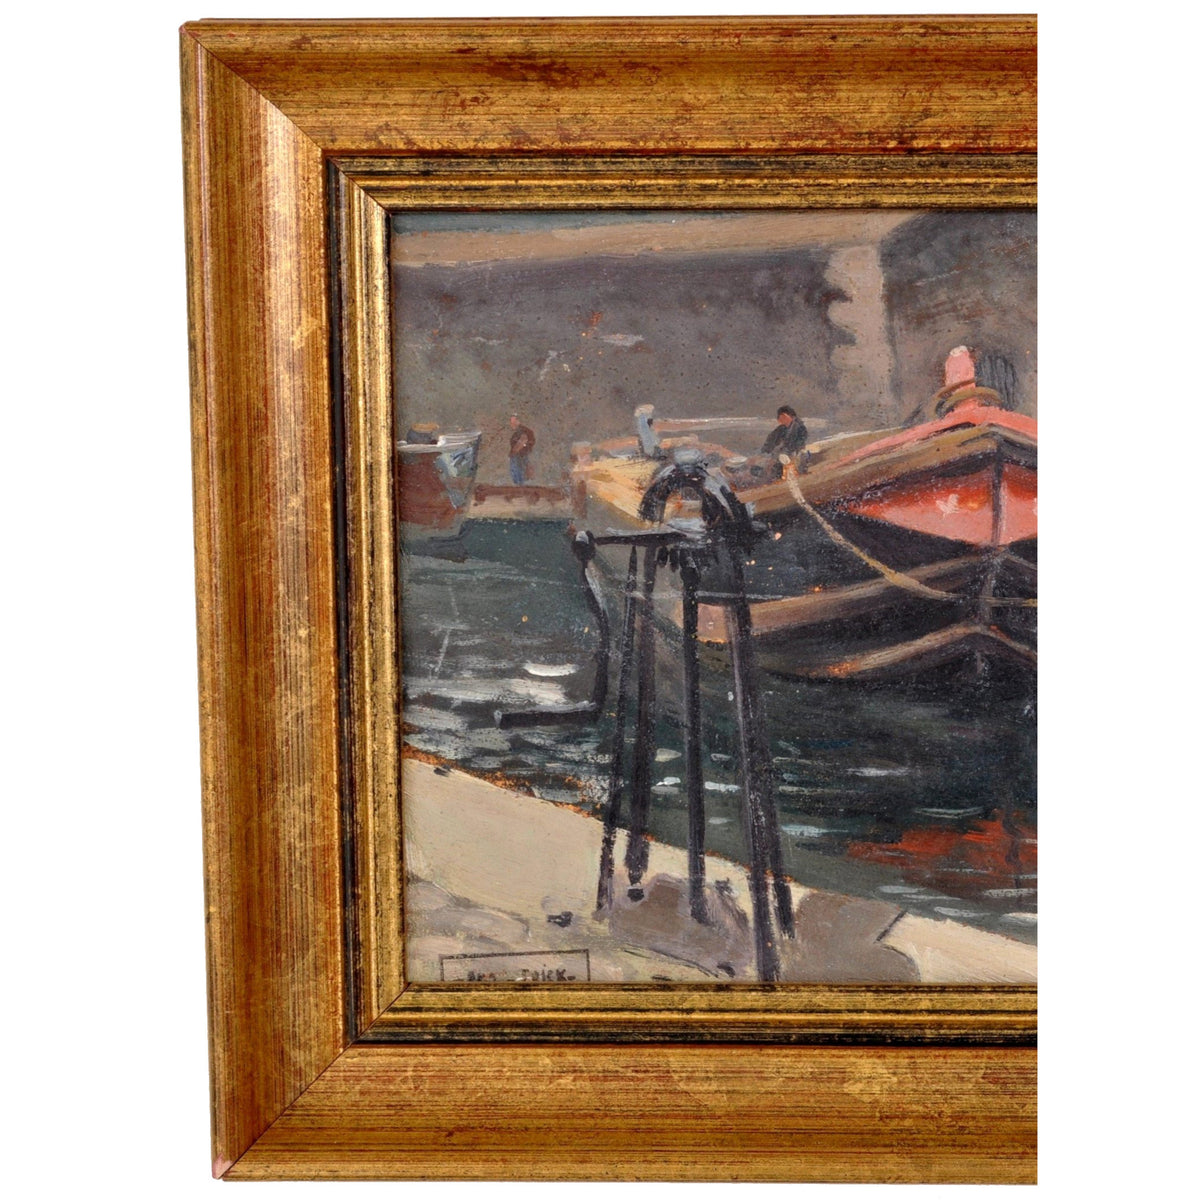 Antique French Impressionist Oil Painting 'Preparing the Boat for Voyage" Paul de Frick 1900